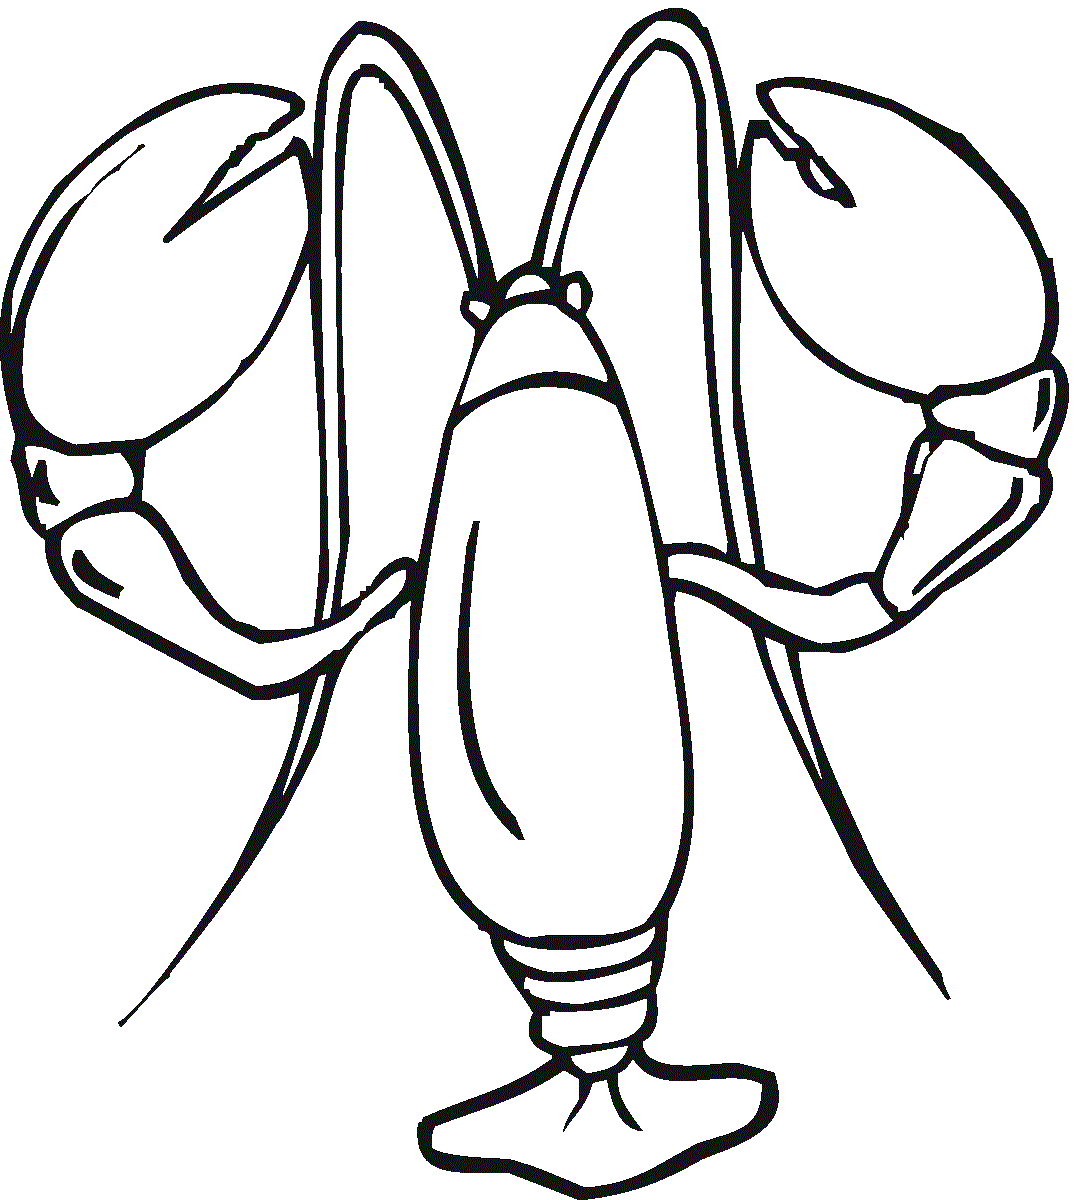 Lobster Cute For Kids Coloring Page